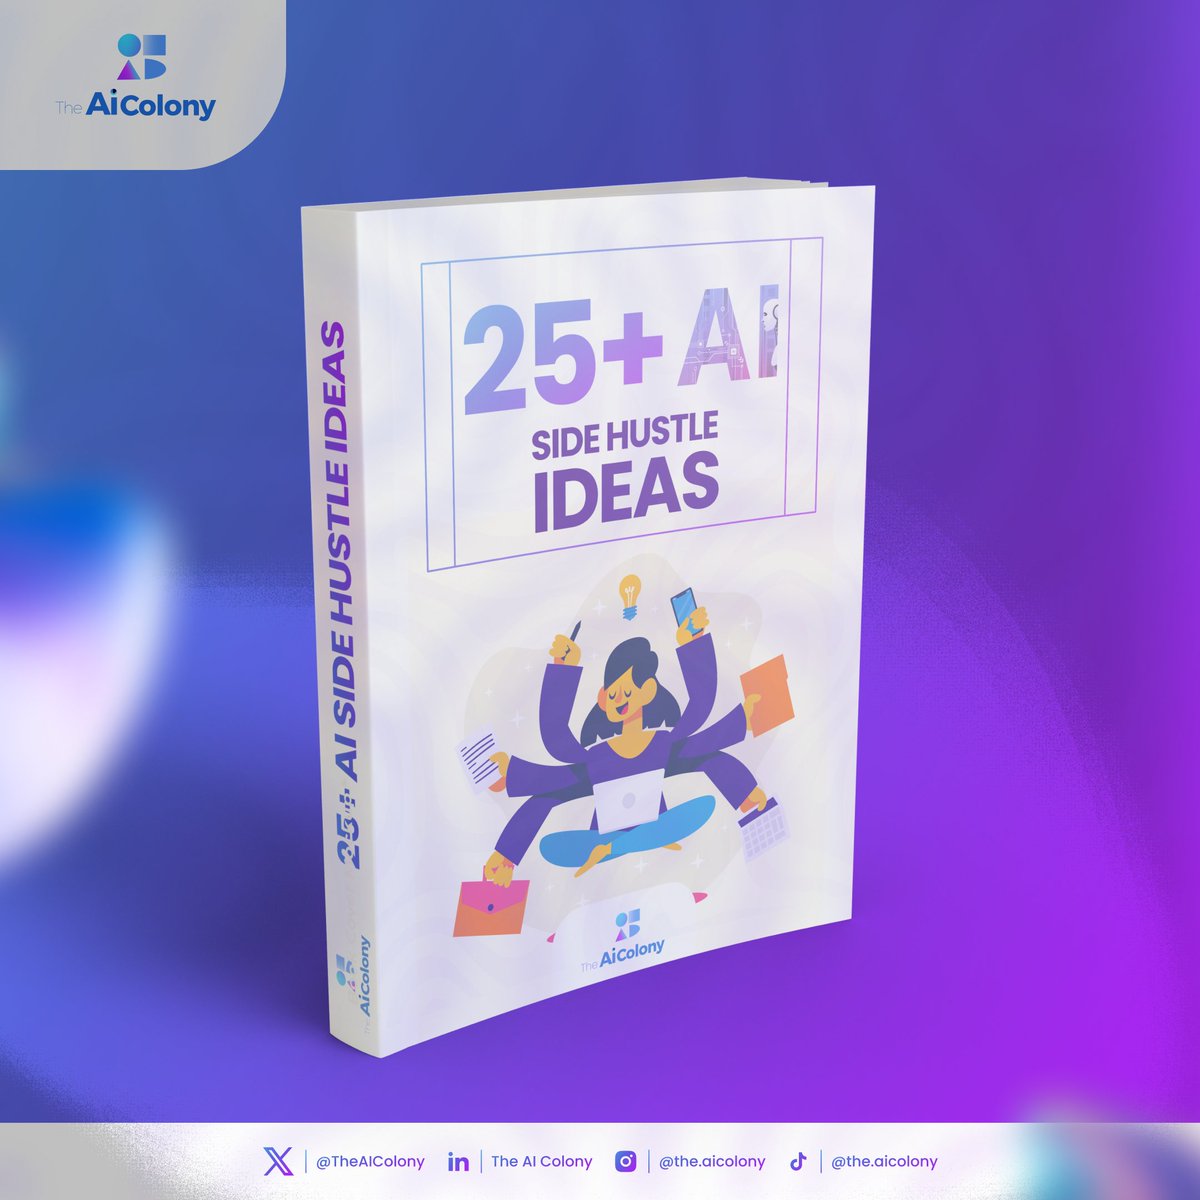 Kids today are banking $40,000/month with AI. But most people don’t know how. That's why we created '25+ AI Side Hustle Ideas' Worth $299, but FREE for the next 24hrs! To get it, just: → Like + Repost → Comment 'AI' → Follow us (So we can DM)